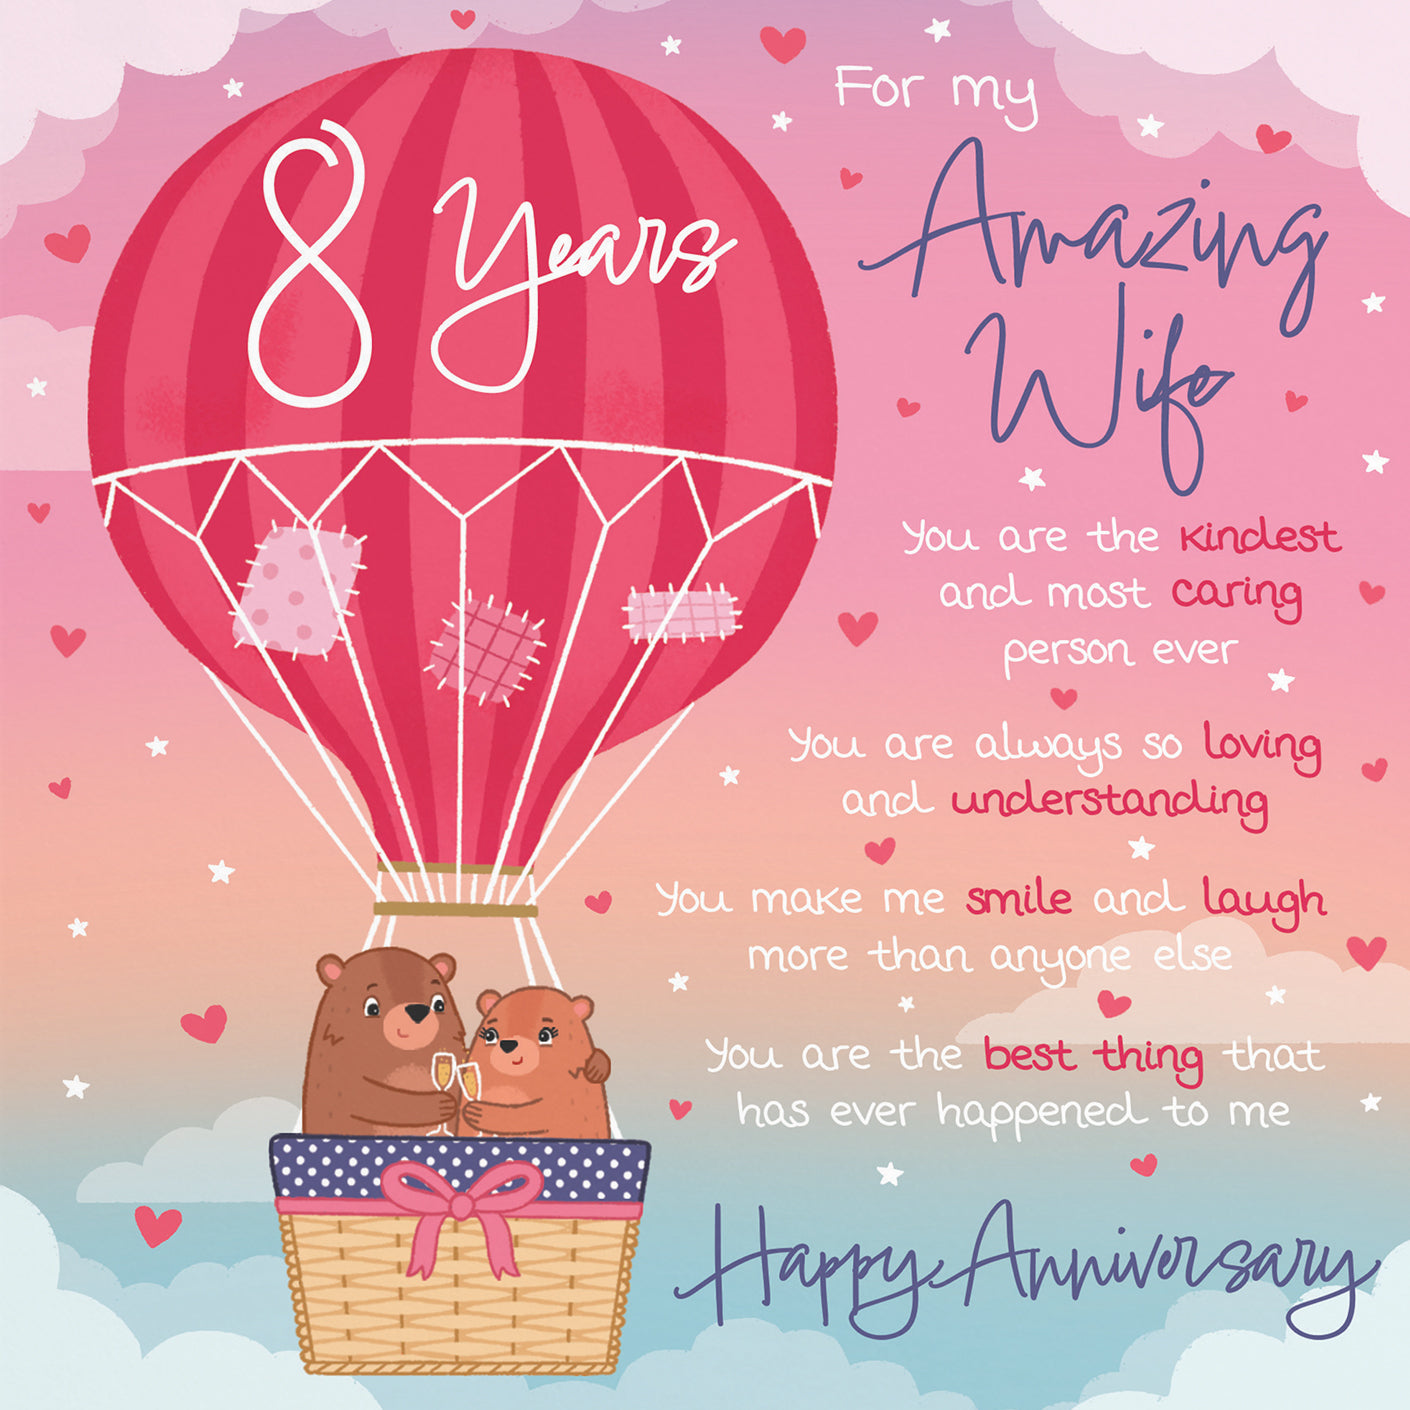 Wife 8th Anniversary Poem Card Love Is In The Air Cute Bears